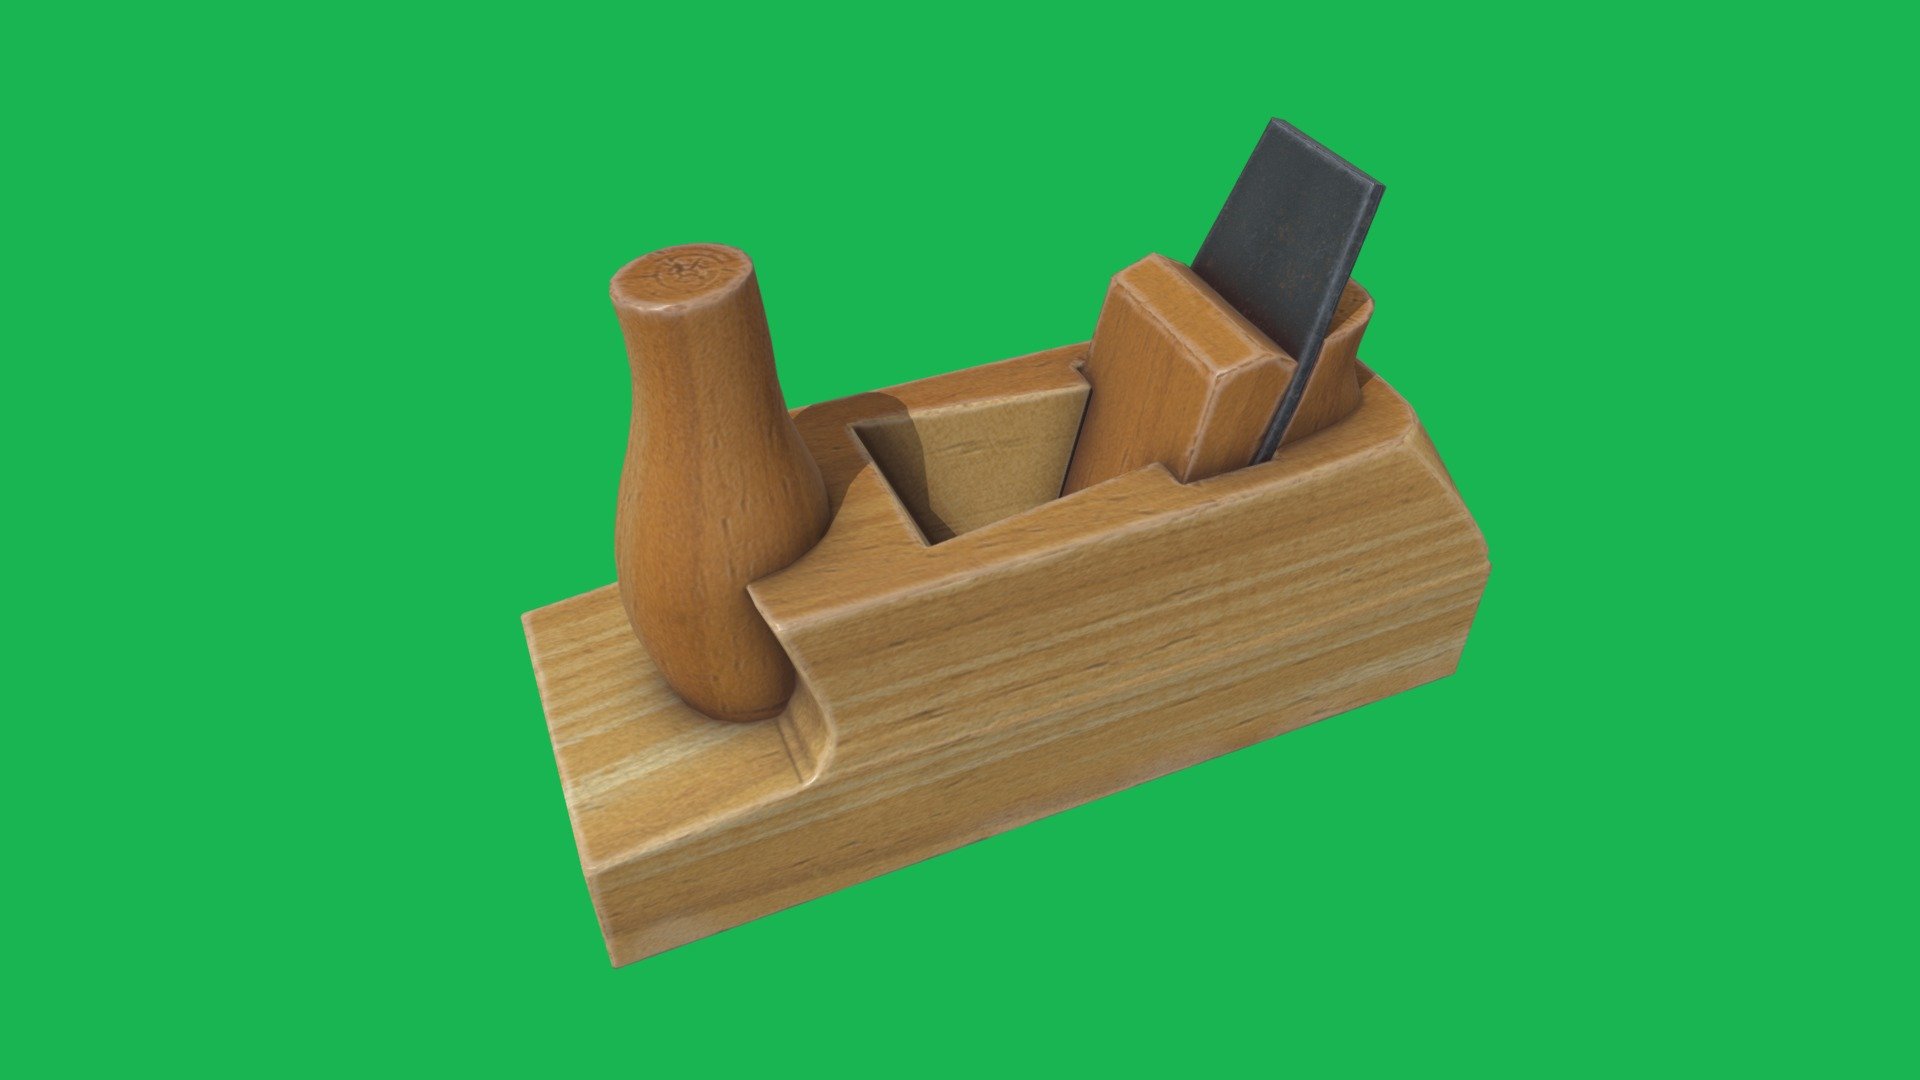 Subscribe to my youtube channel: www.youtube.com/channel/UCZKv7L9XvH2jnnsVqFzP96g - Wood Plane Cartoon - Download Free 3D model by emelyarules 3d model